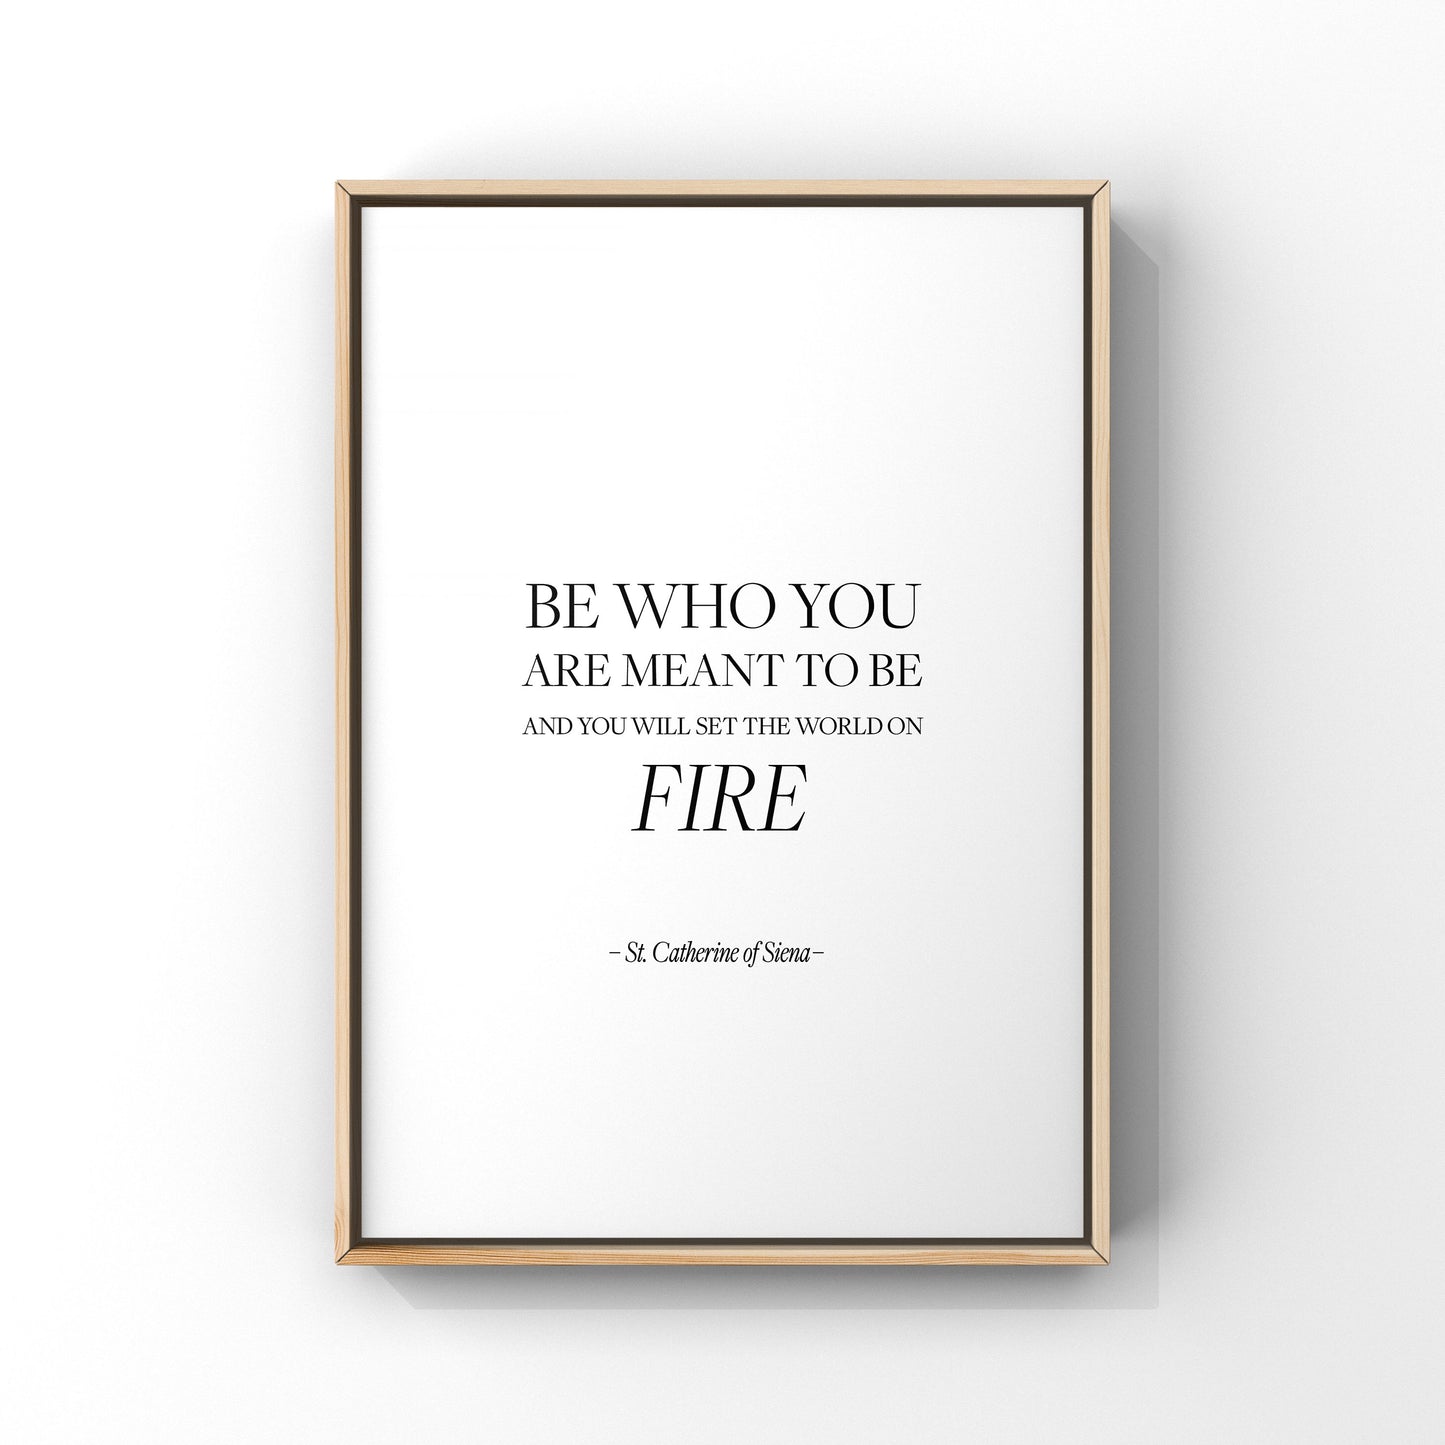 Be who you are meant to be and you will set the world on fire,St Catherine of Siena,Inspirational print,Motivational quote,Gift for her